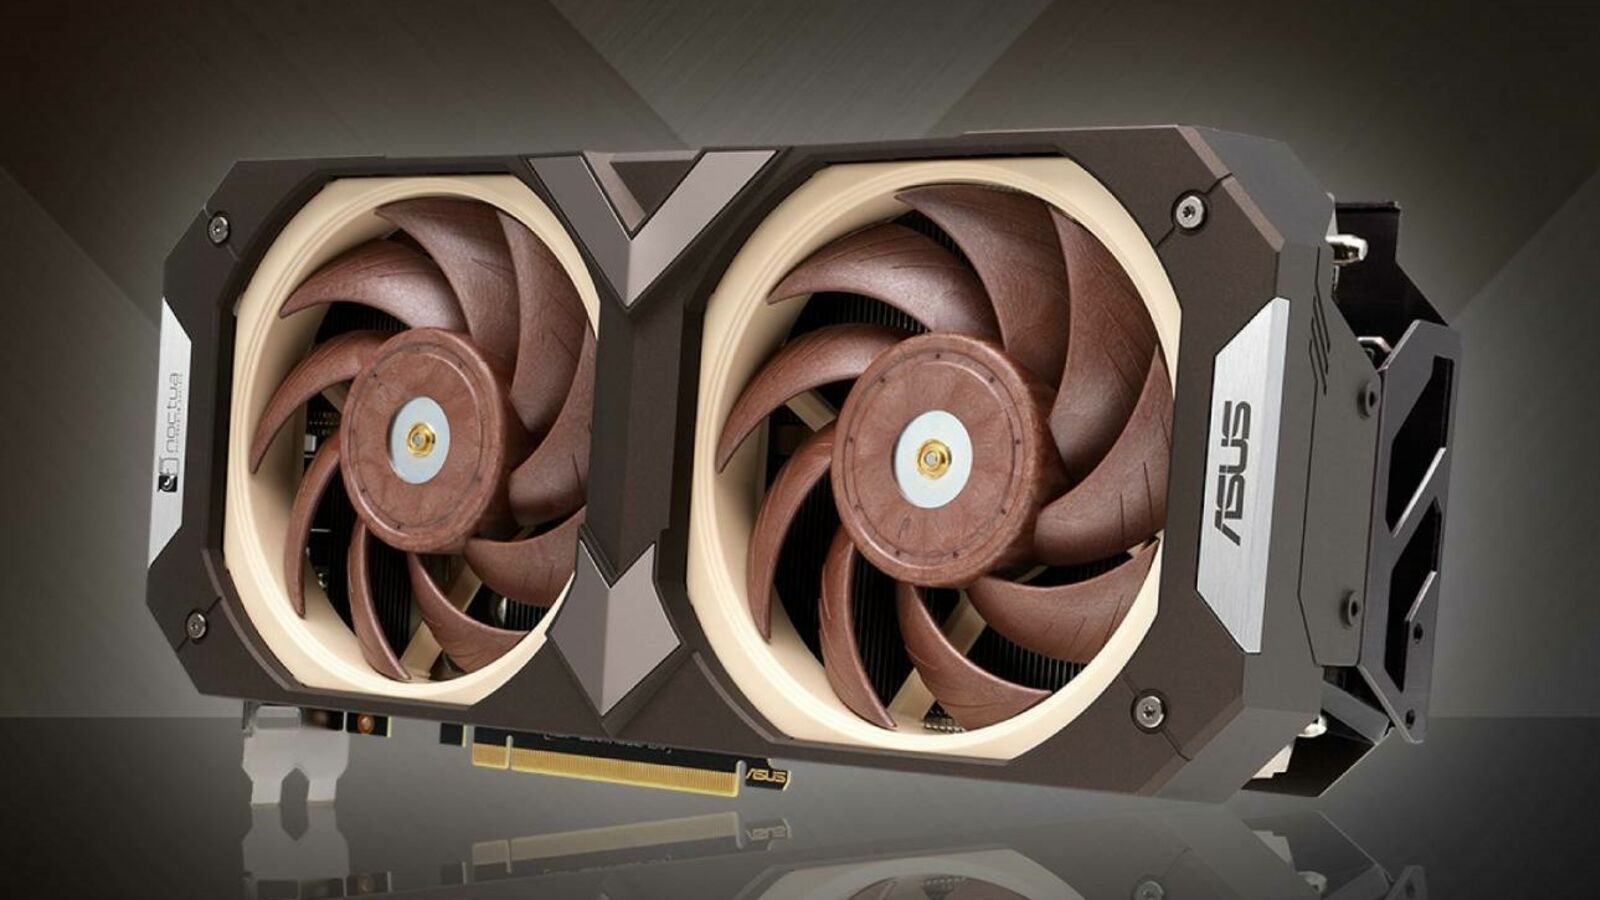 Asus and Noctua have teamed up on a quieter, browner GeForce RTX 3070. Rock Paper Shotgun